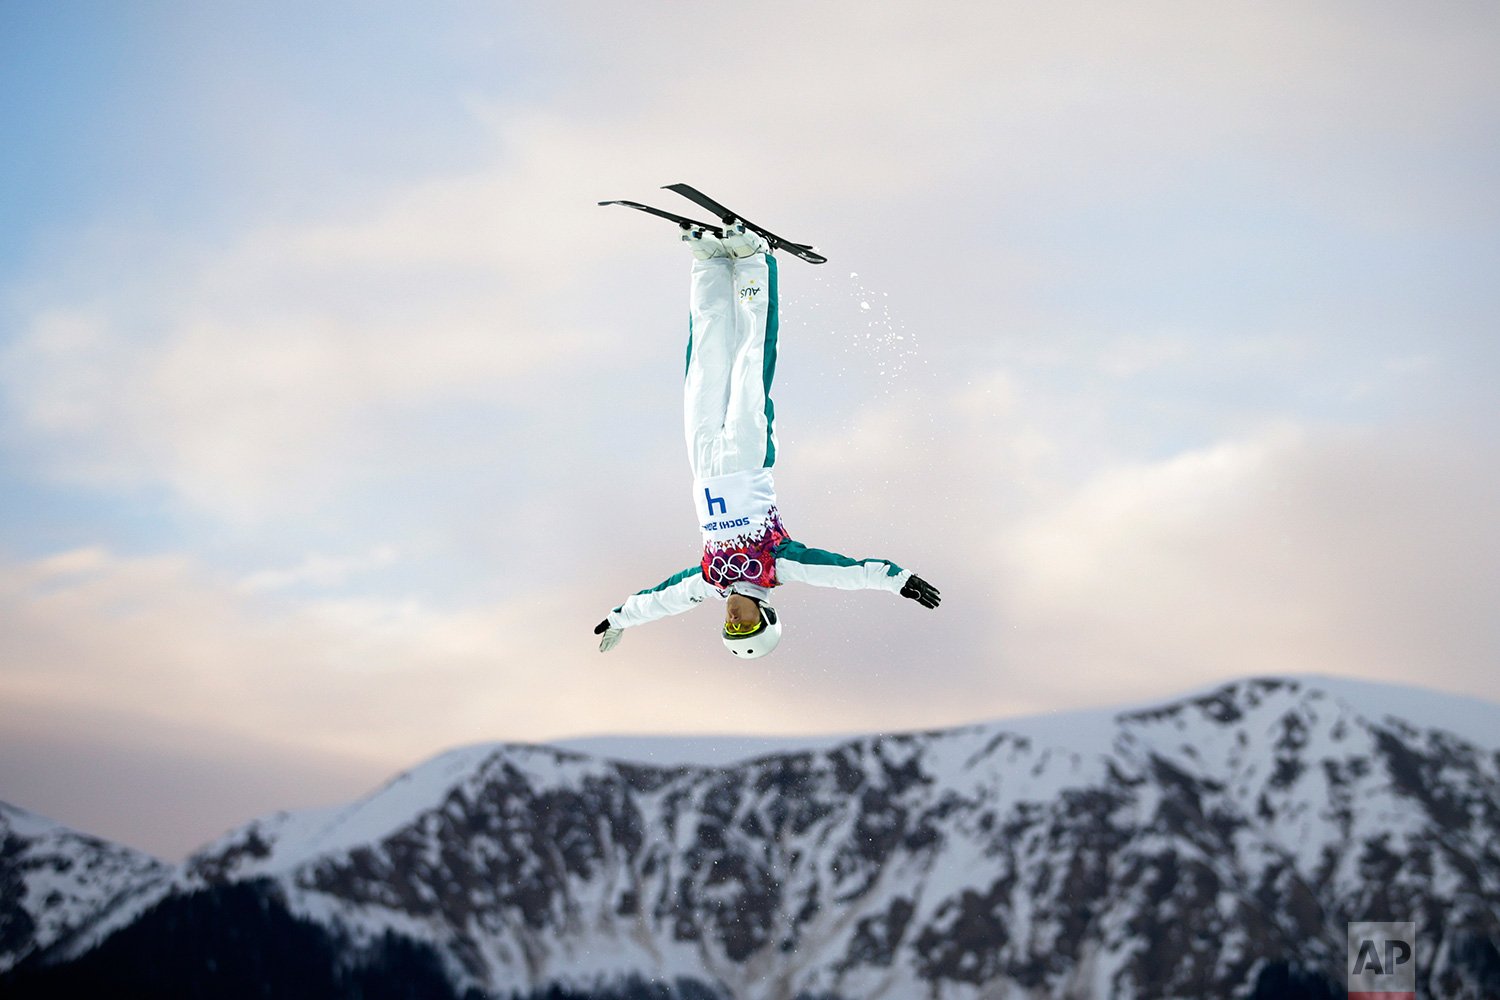  Australia's Lydia Lassila competes during the women's freestyle skiing aerials qualifying at the Rosa Khutor Extreme Park, at the 2014 Winter Olympics, on Feb. 14, 2014, in Krasnaya Polyana, Russia. (AP Photo/Jae C. Hong) 